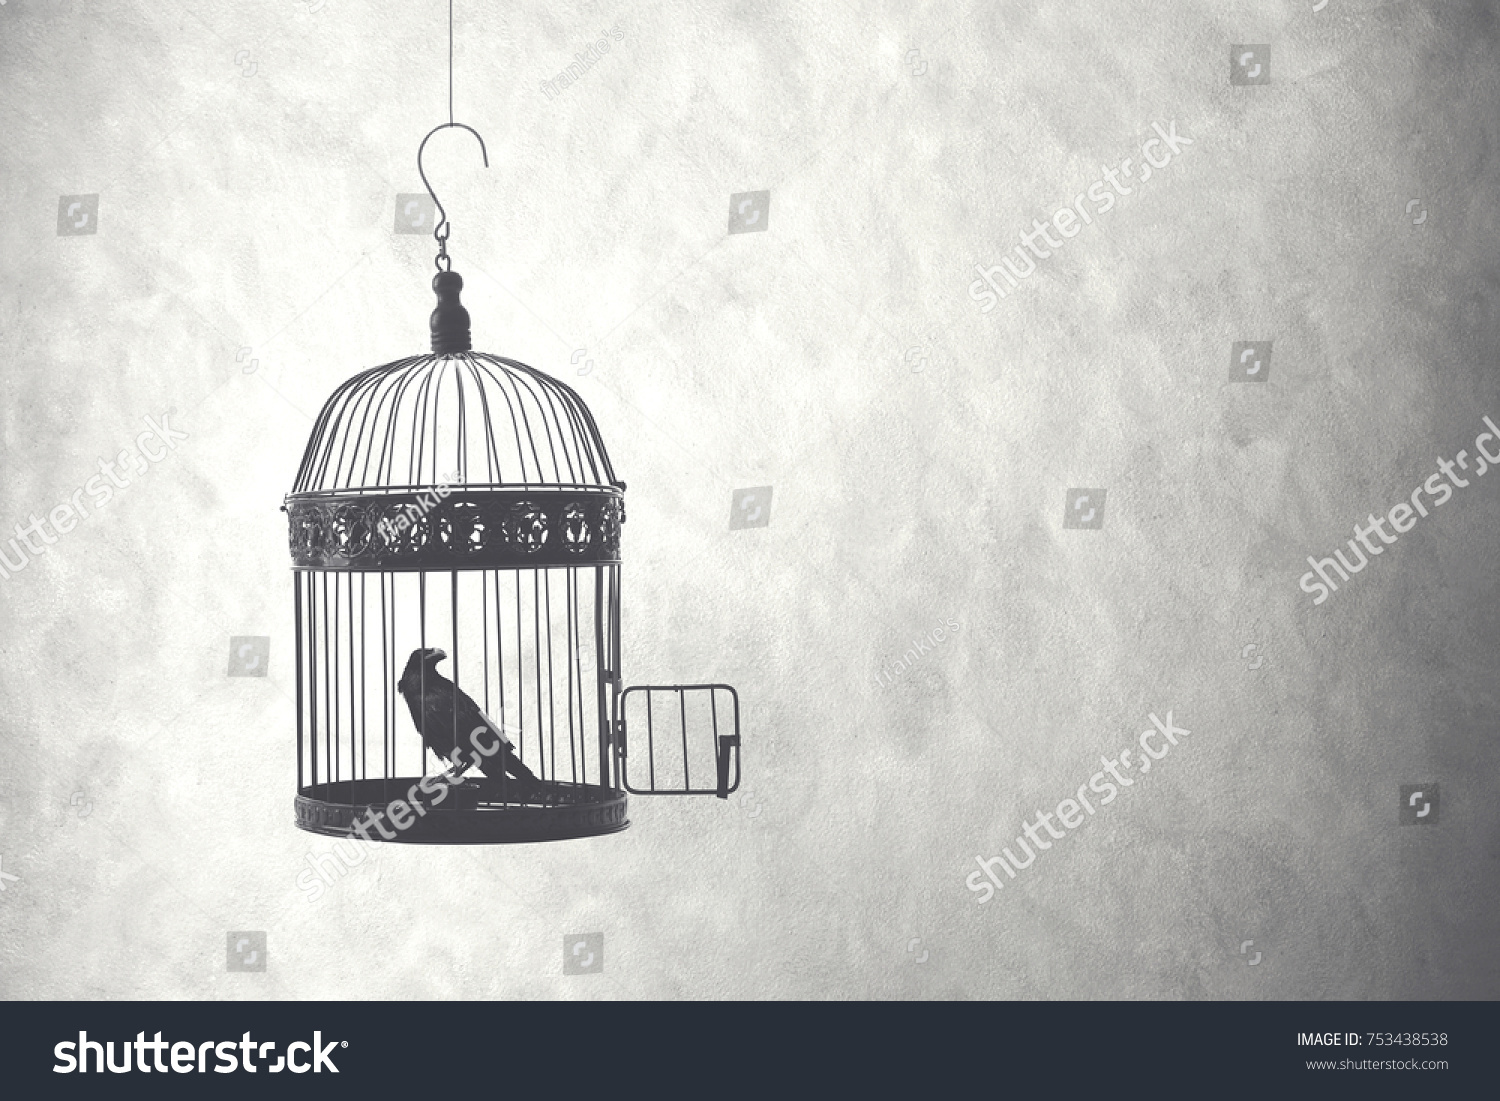 Freedom Concept Bird Open Cage Stock Photo 753438538 | Shutterstock